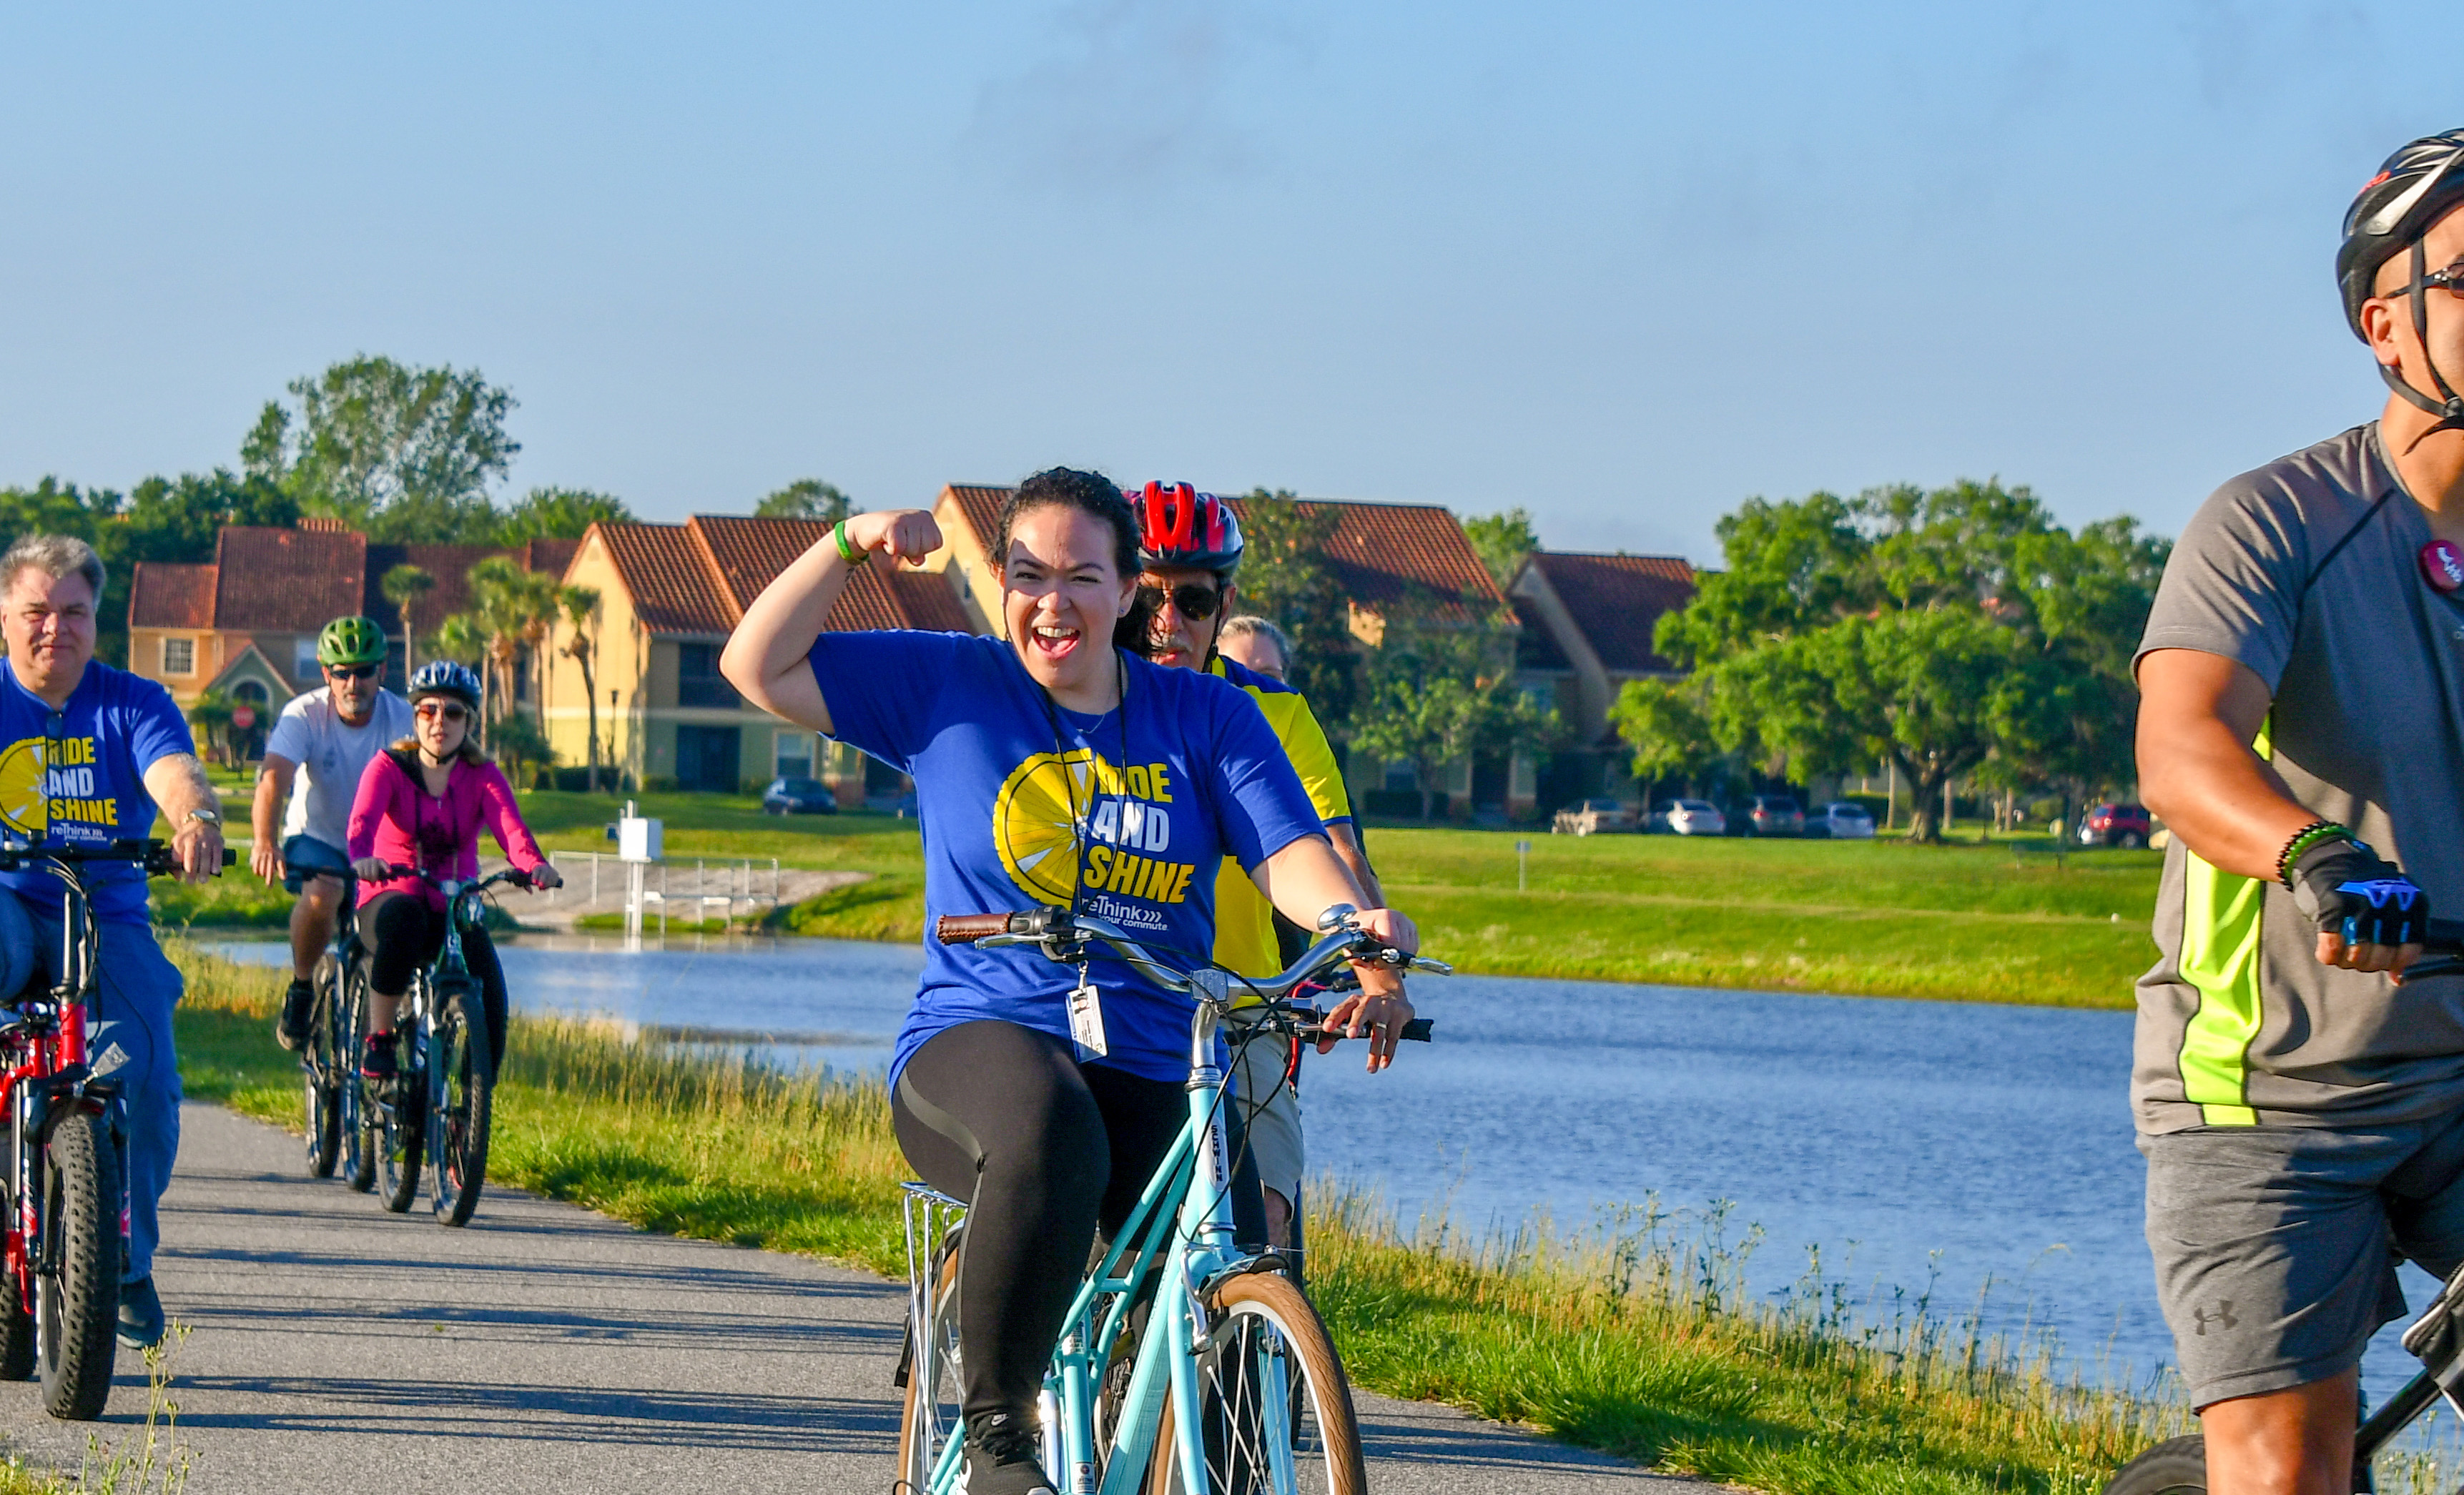 This is a photo of bike riders on Kissimmee Loop Trail